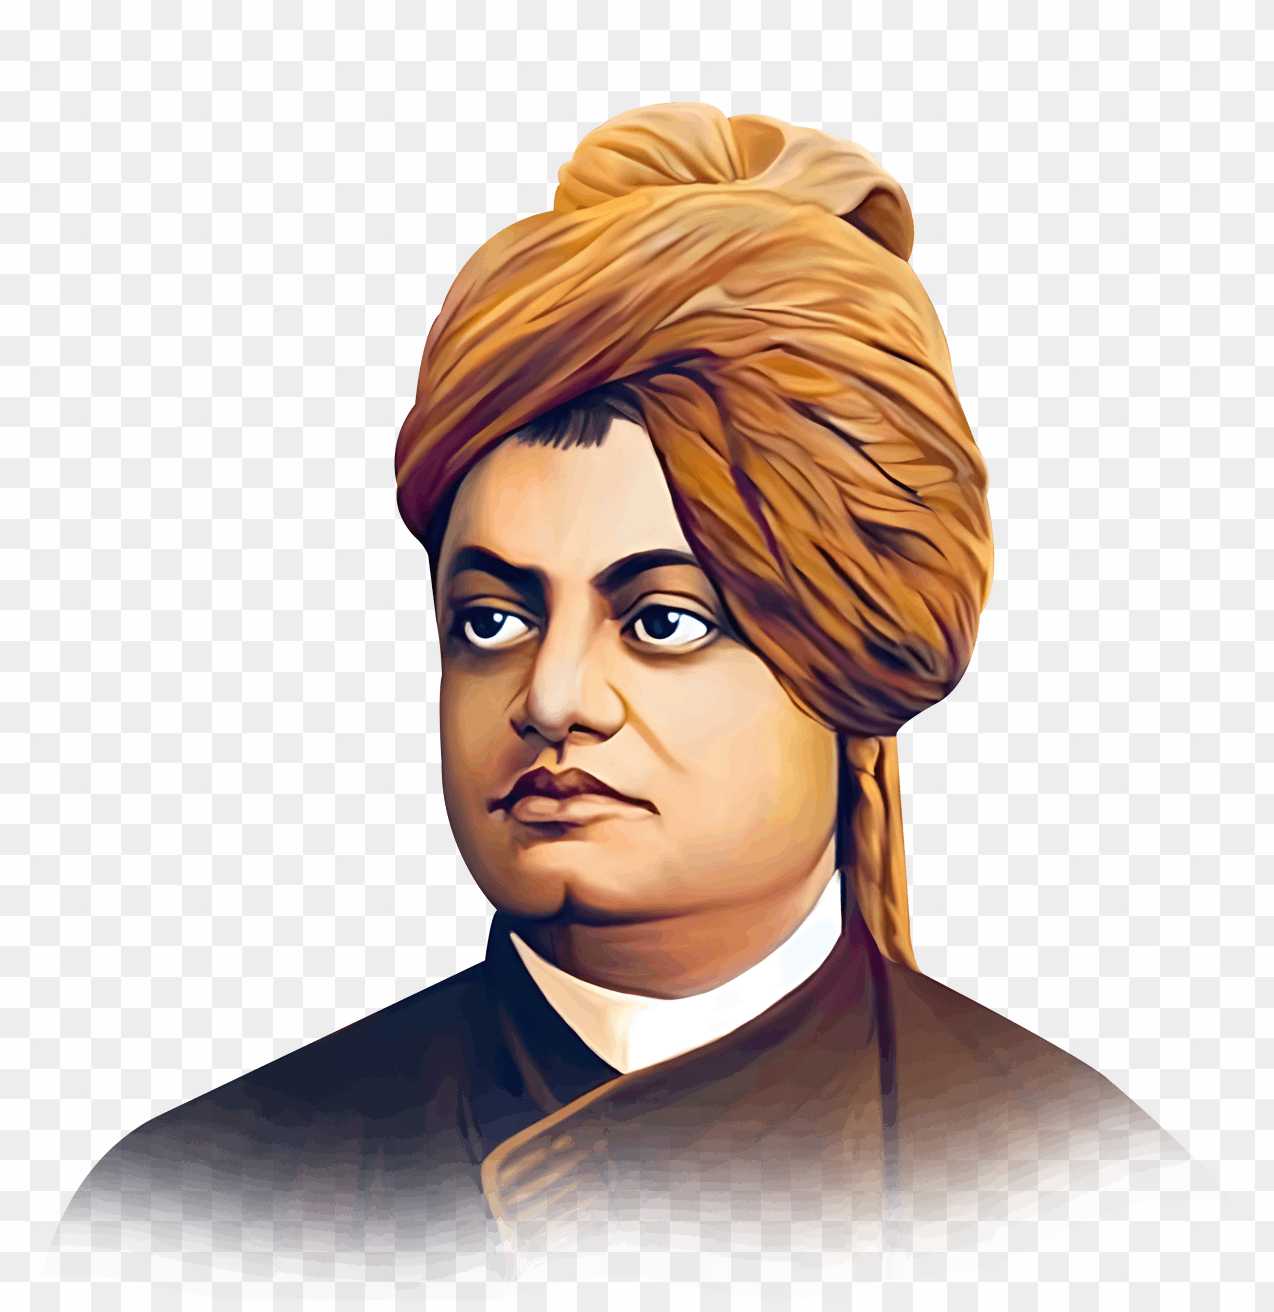 Swami Vivekanand png images